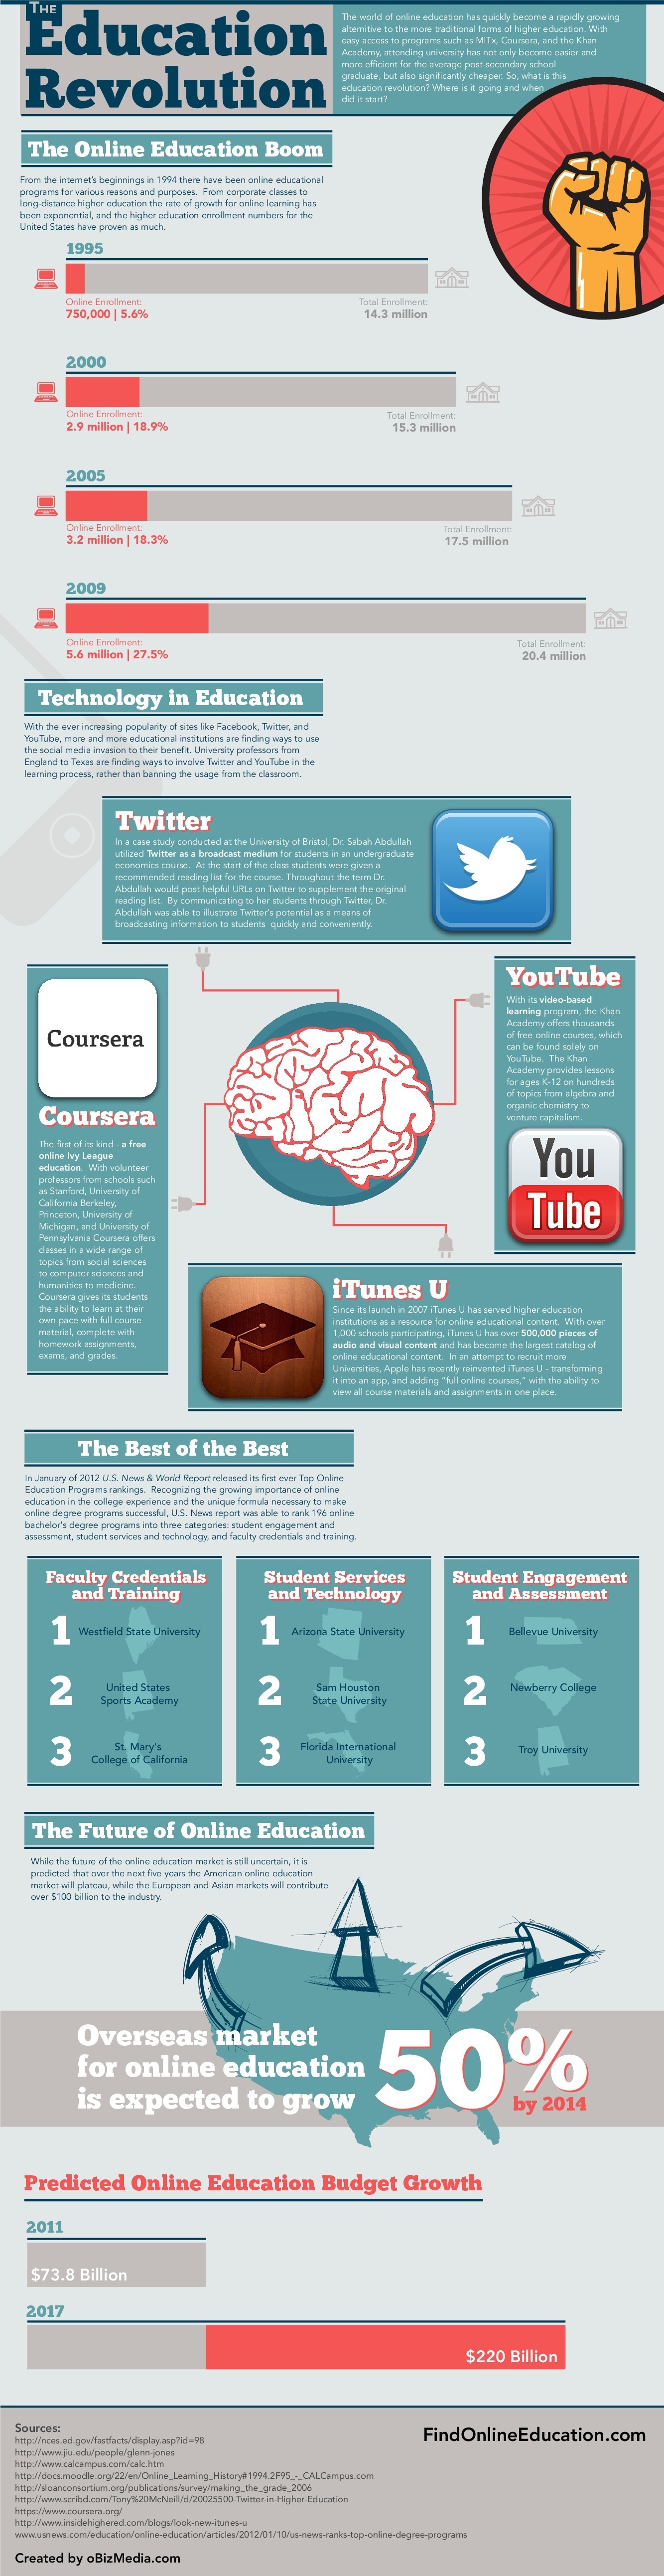 The Online Education Revolution Infographic